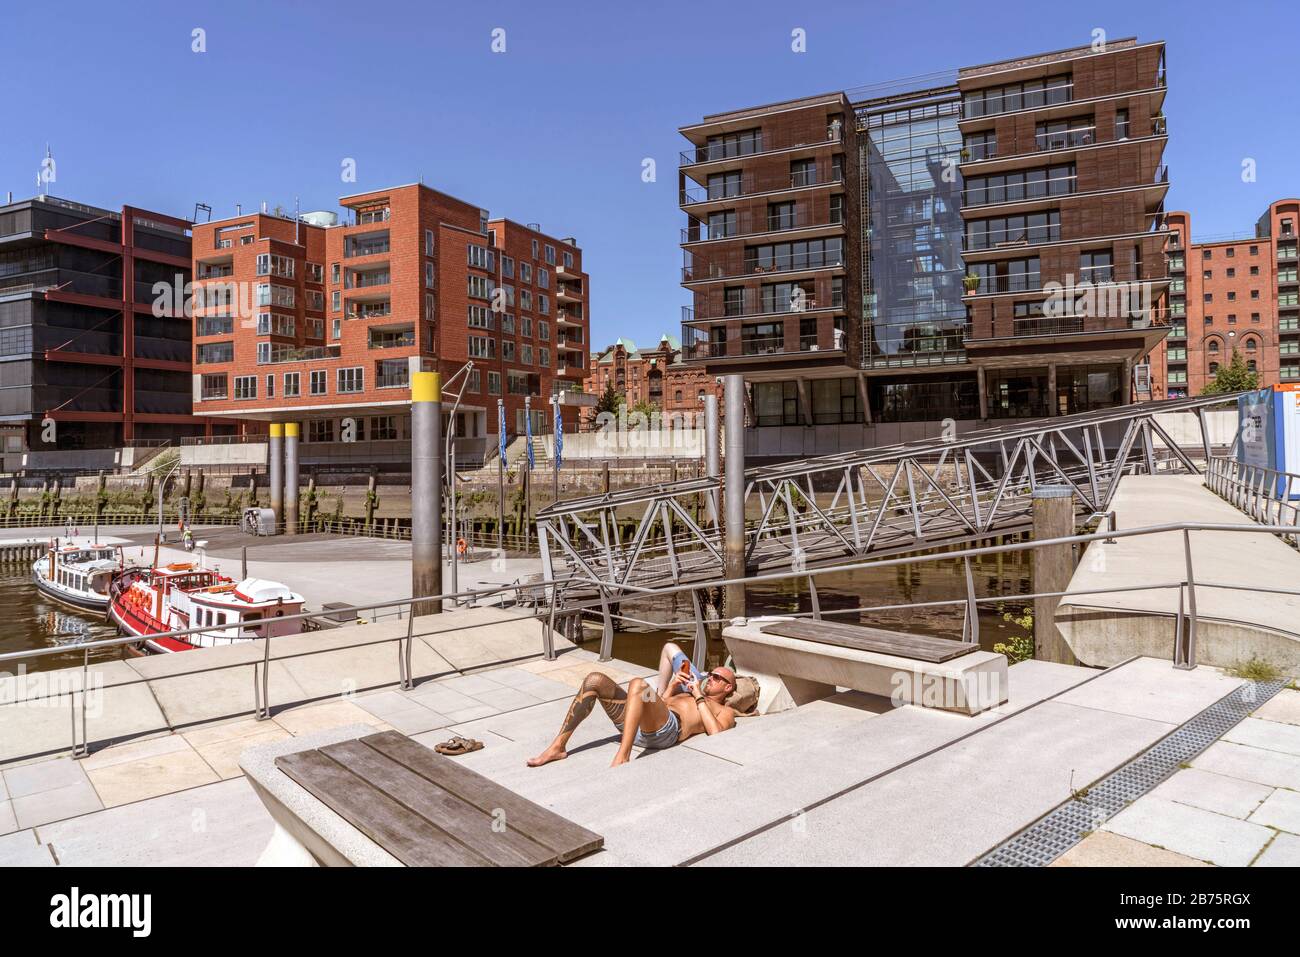 Germany, Hamburg, 09.07.2017. Real estate in the HafenCity district on 09.07.2017. HafenCity is located in Hamburg-Mitte, was founded in 2008 and is the largest inner-city urban development project in Europe. [automated translation] Stock Photo